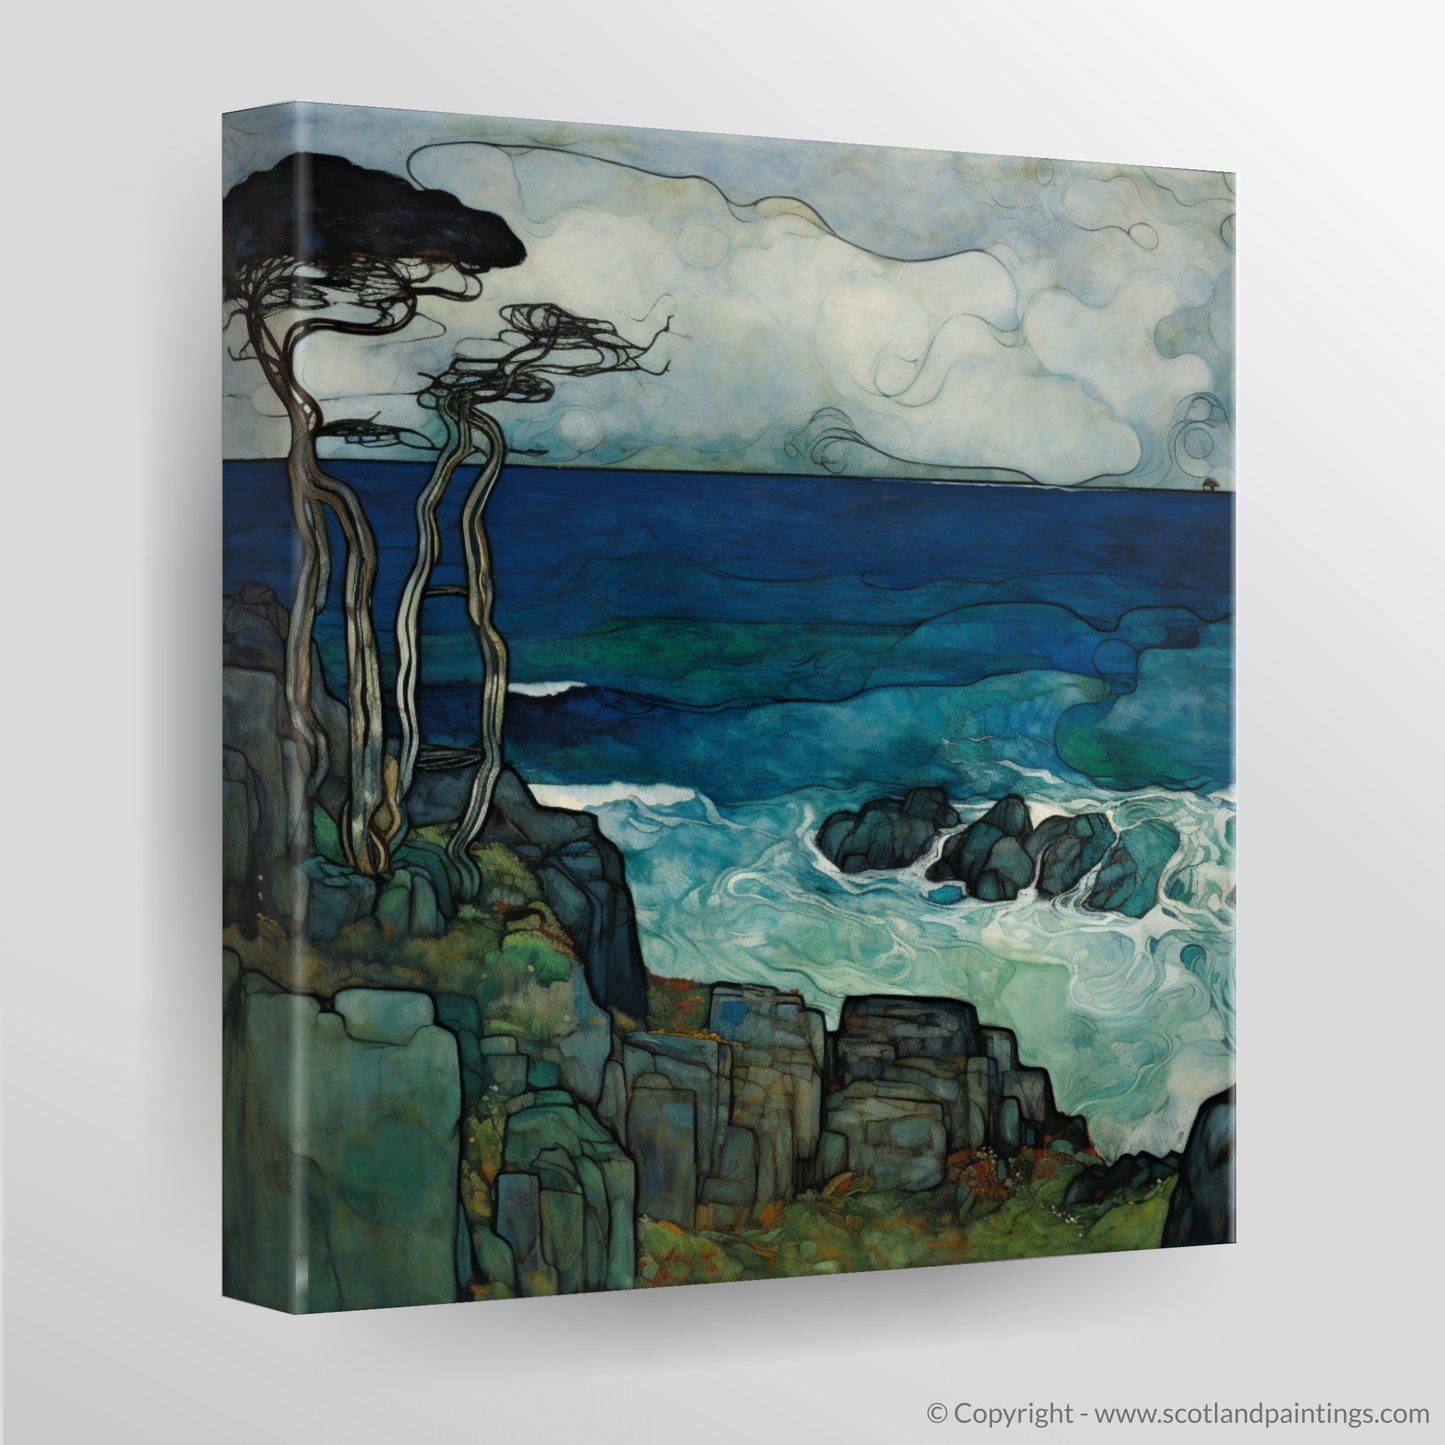 Storm Over Sound of Iona: An Art Nouveau Tribute to Scottish Coves